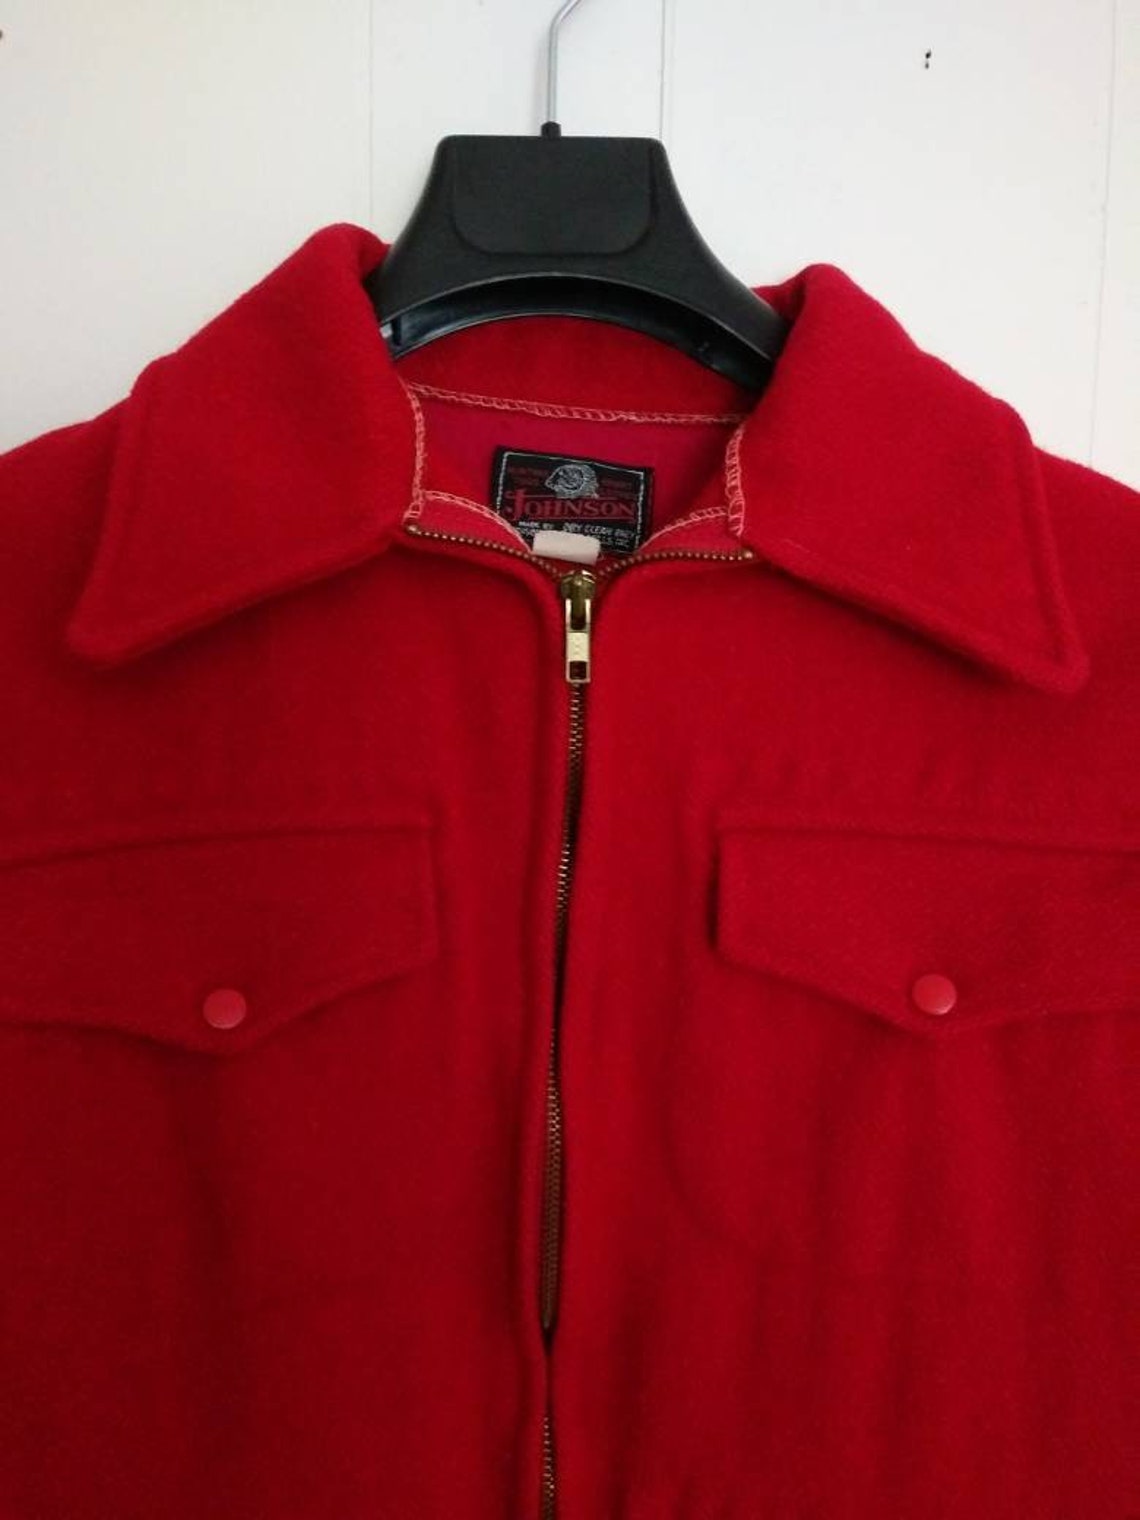 Vintage 1950s Red Johnson Woolen Mills Red Hunting Jacket Size - Etsy